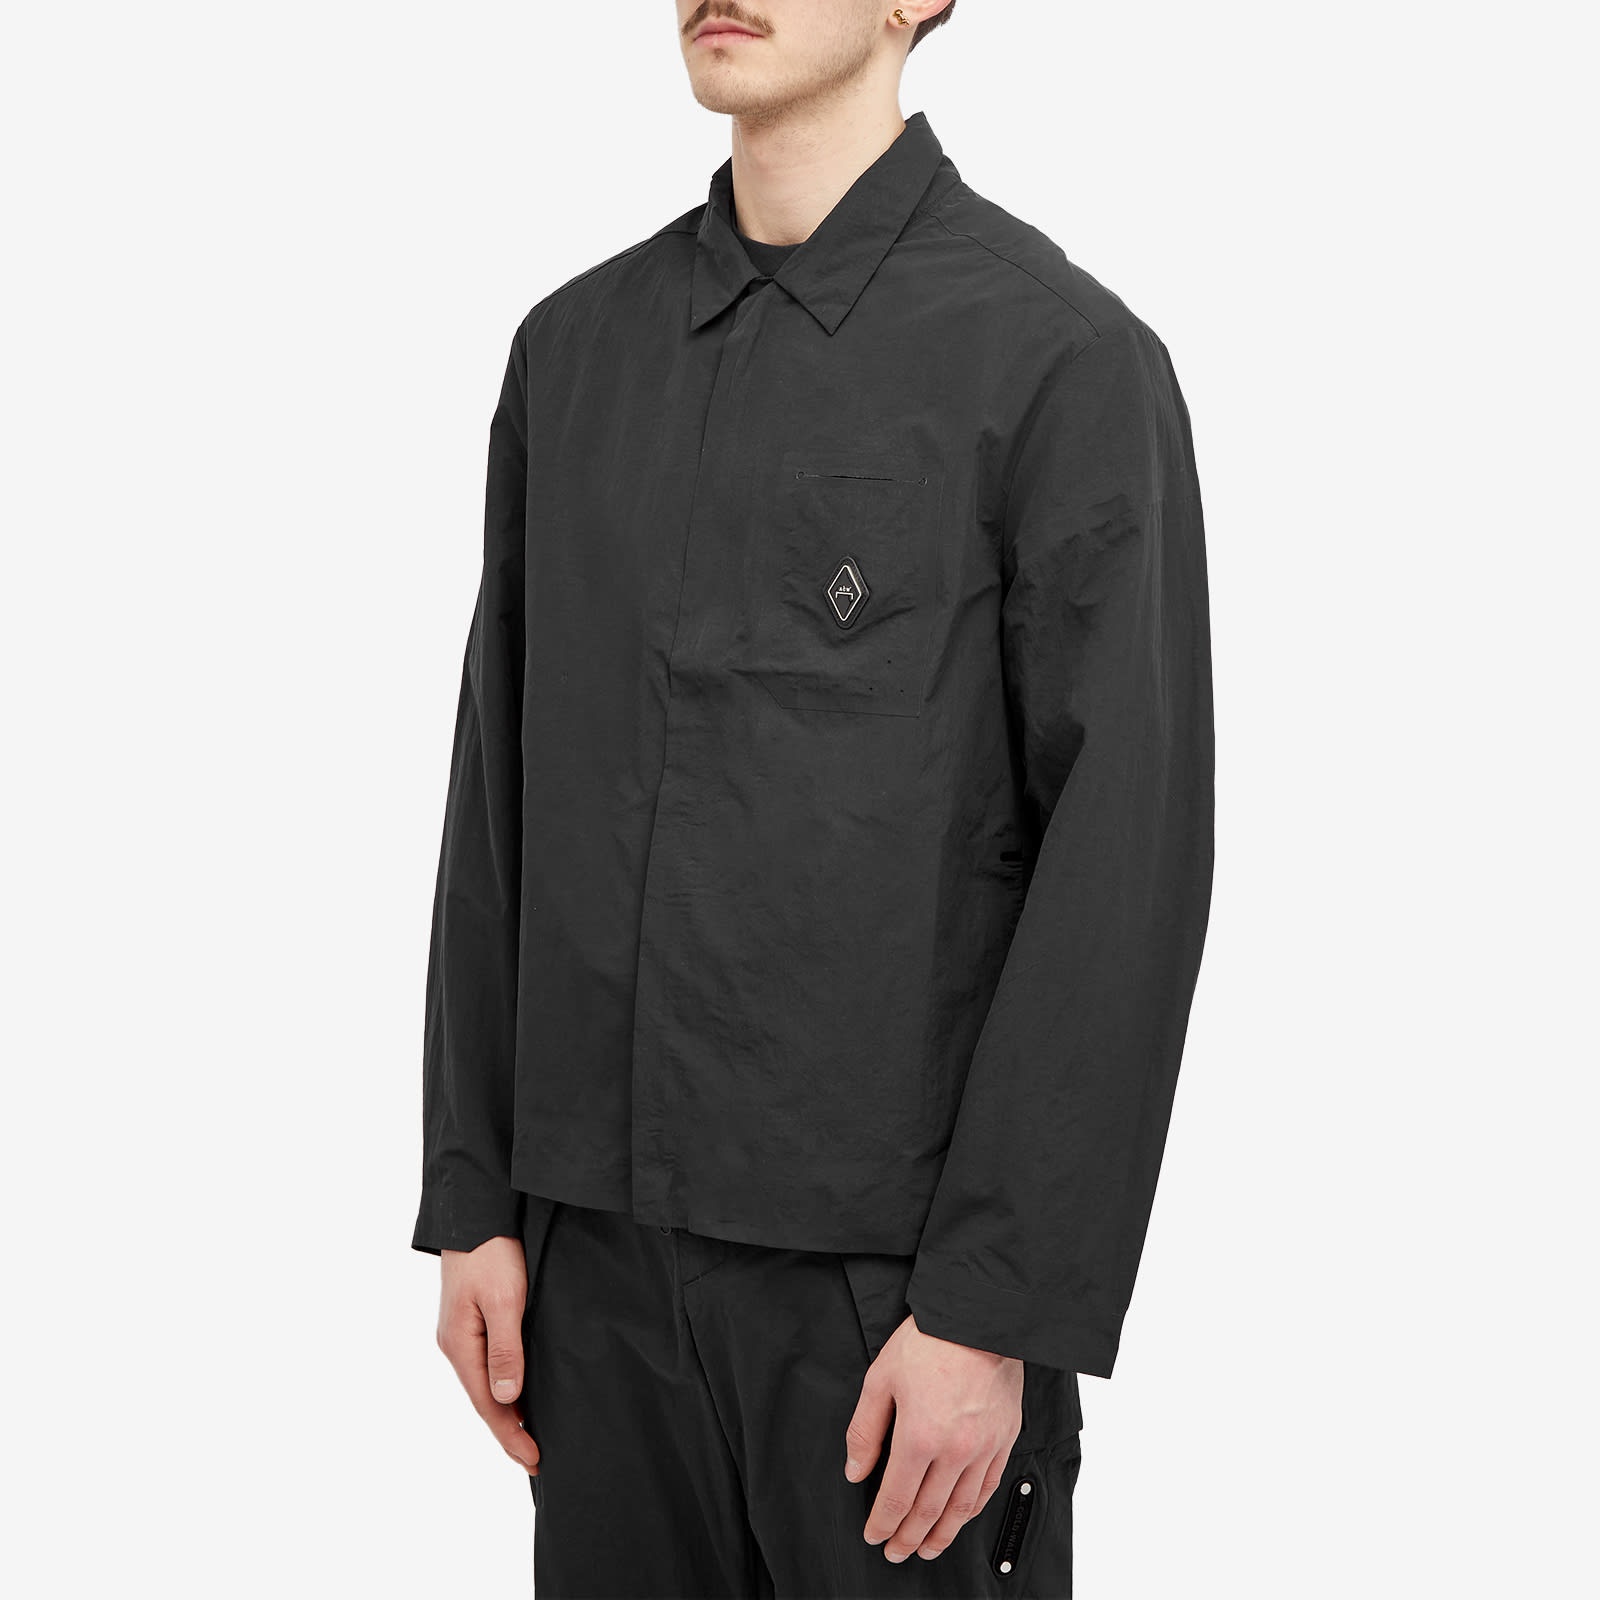 A-COLD-WALL* System Overshirt - 2